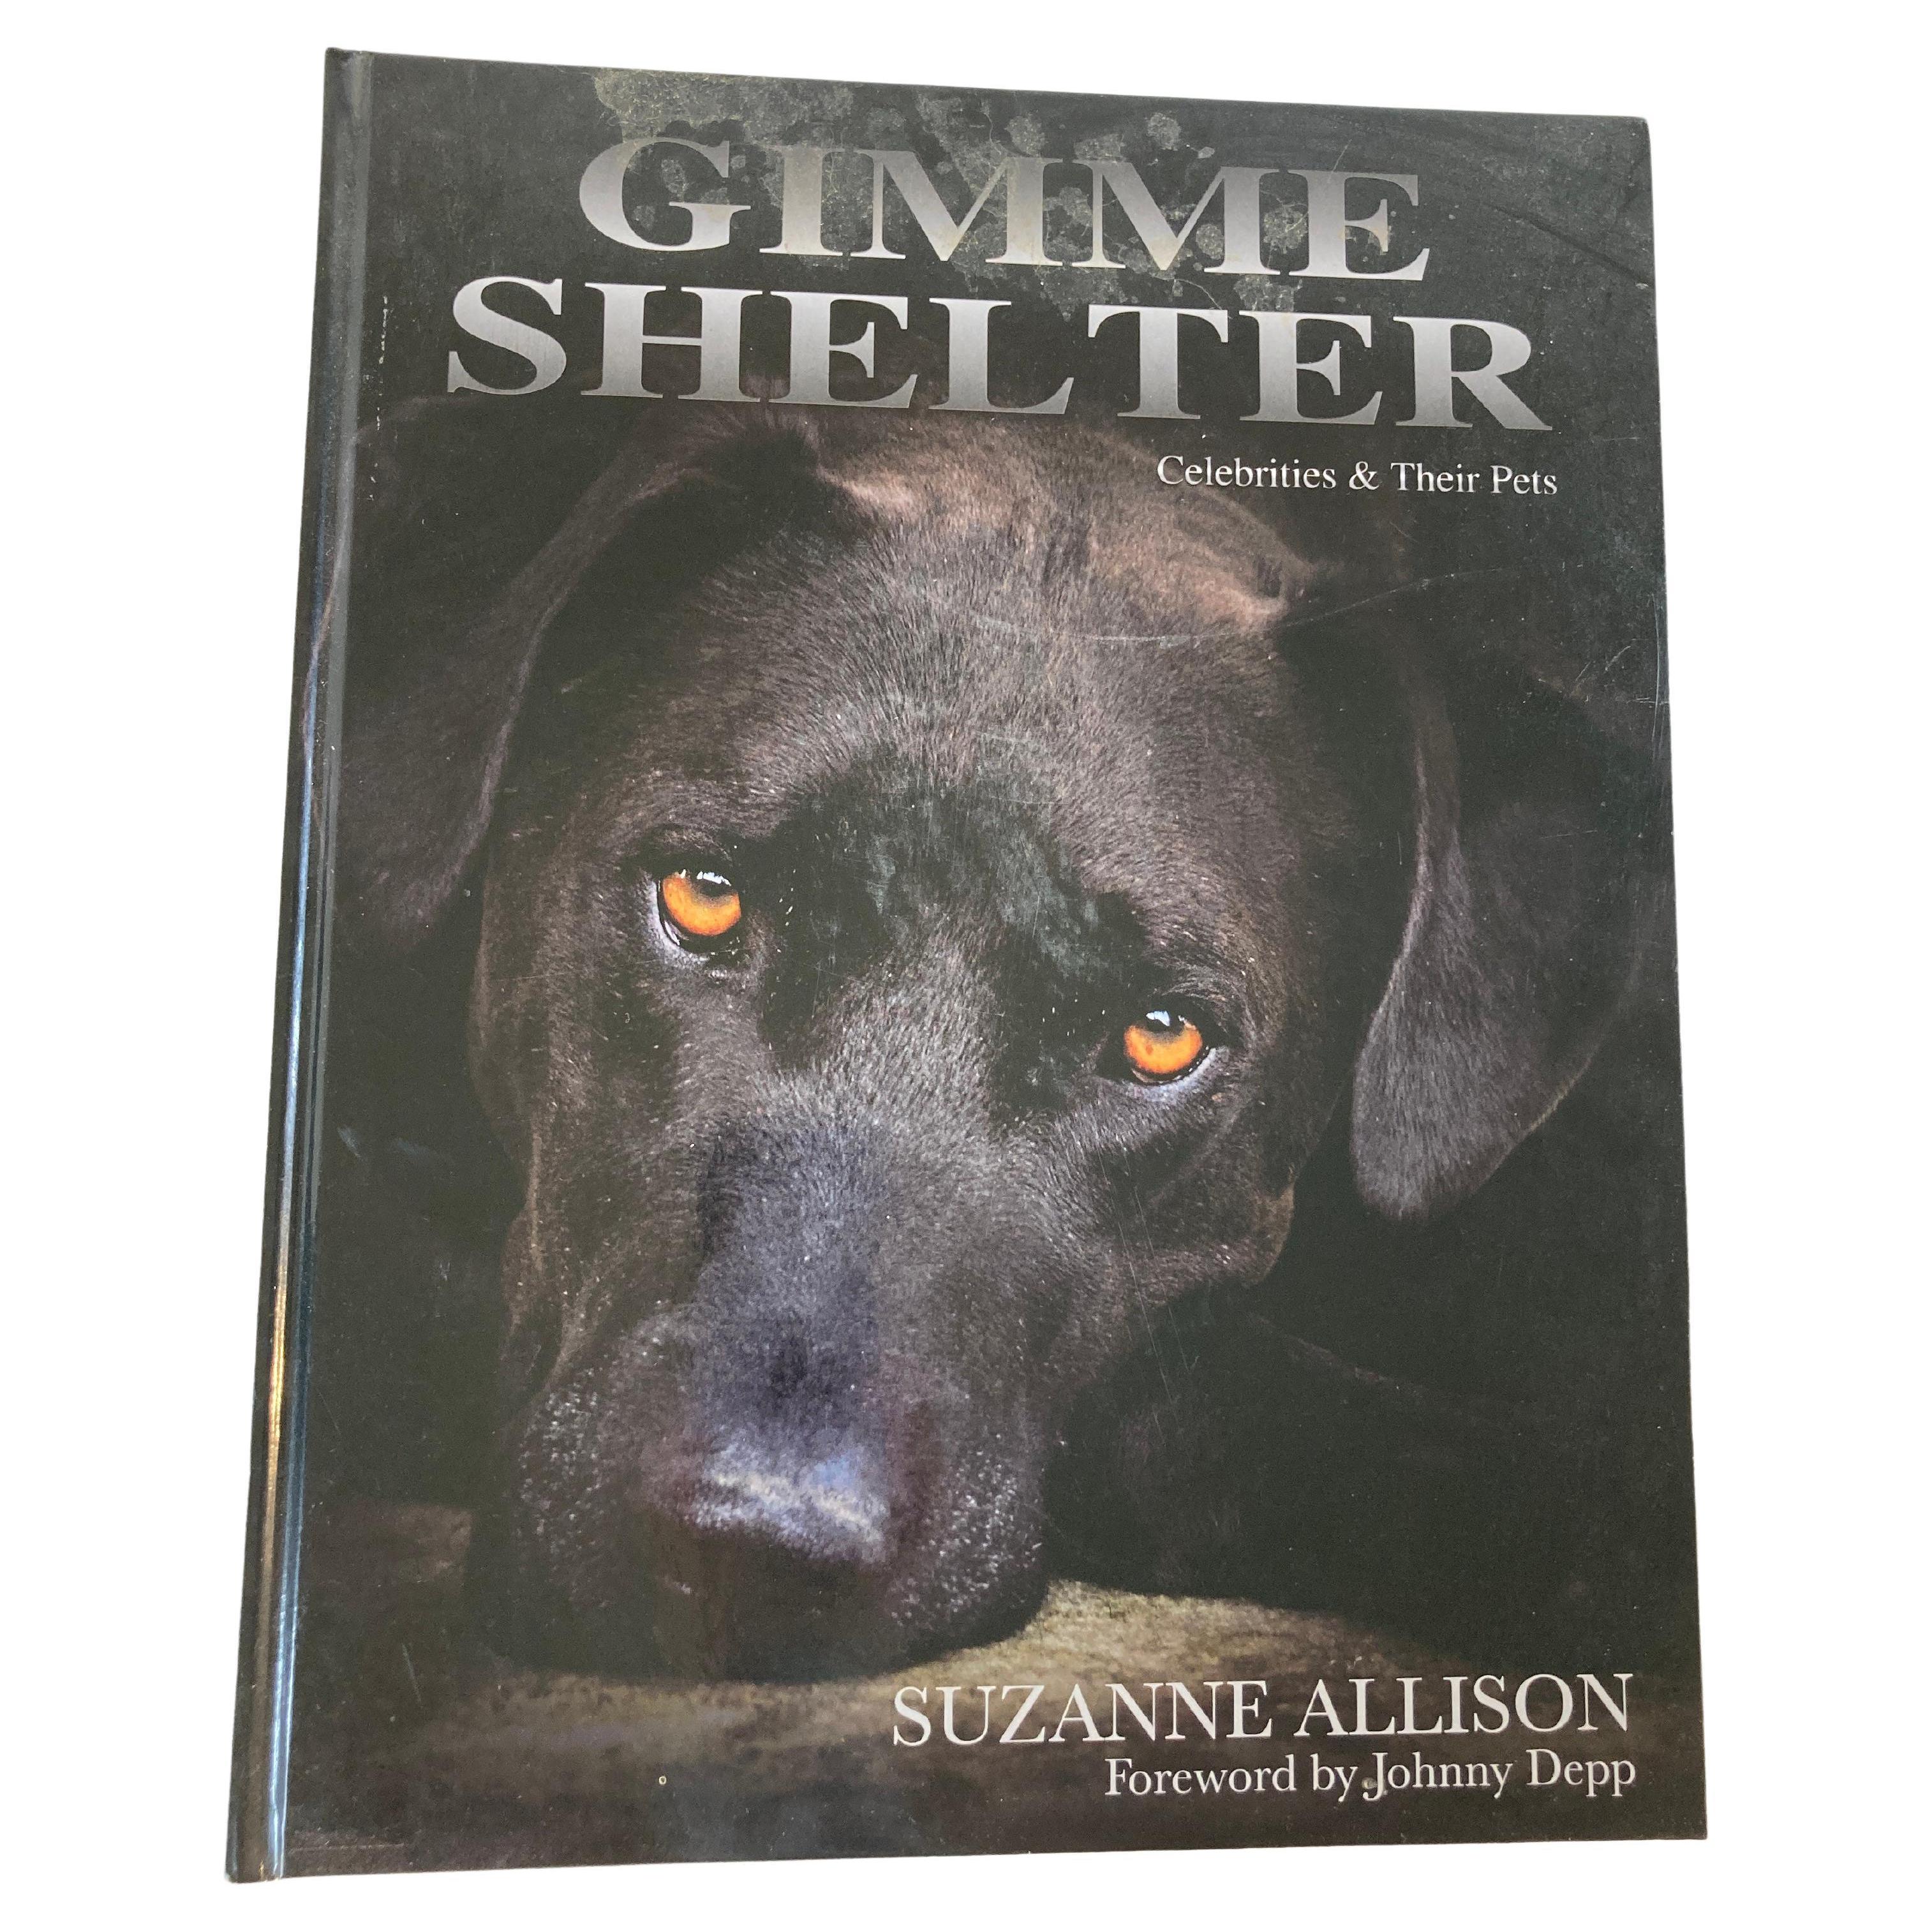 Gimme Shelter: Celebrities & Their Pets by Suzanne Allison.
Publication Date: 2014
This is a beautiful photographic book.
Fine condition oversized (large folio, over 14 inches tall) color photographic boards. 
Profusely illustrated with color